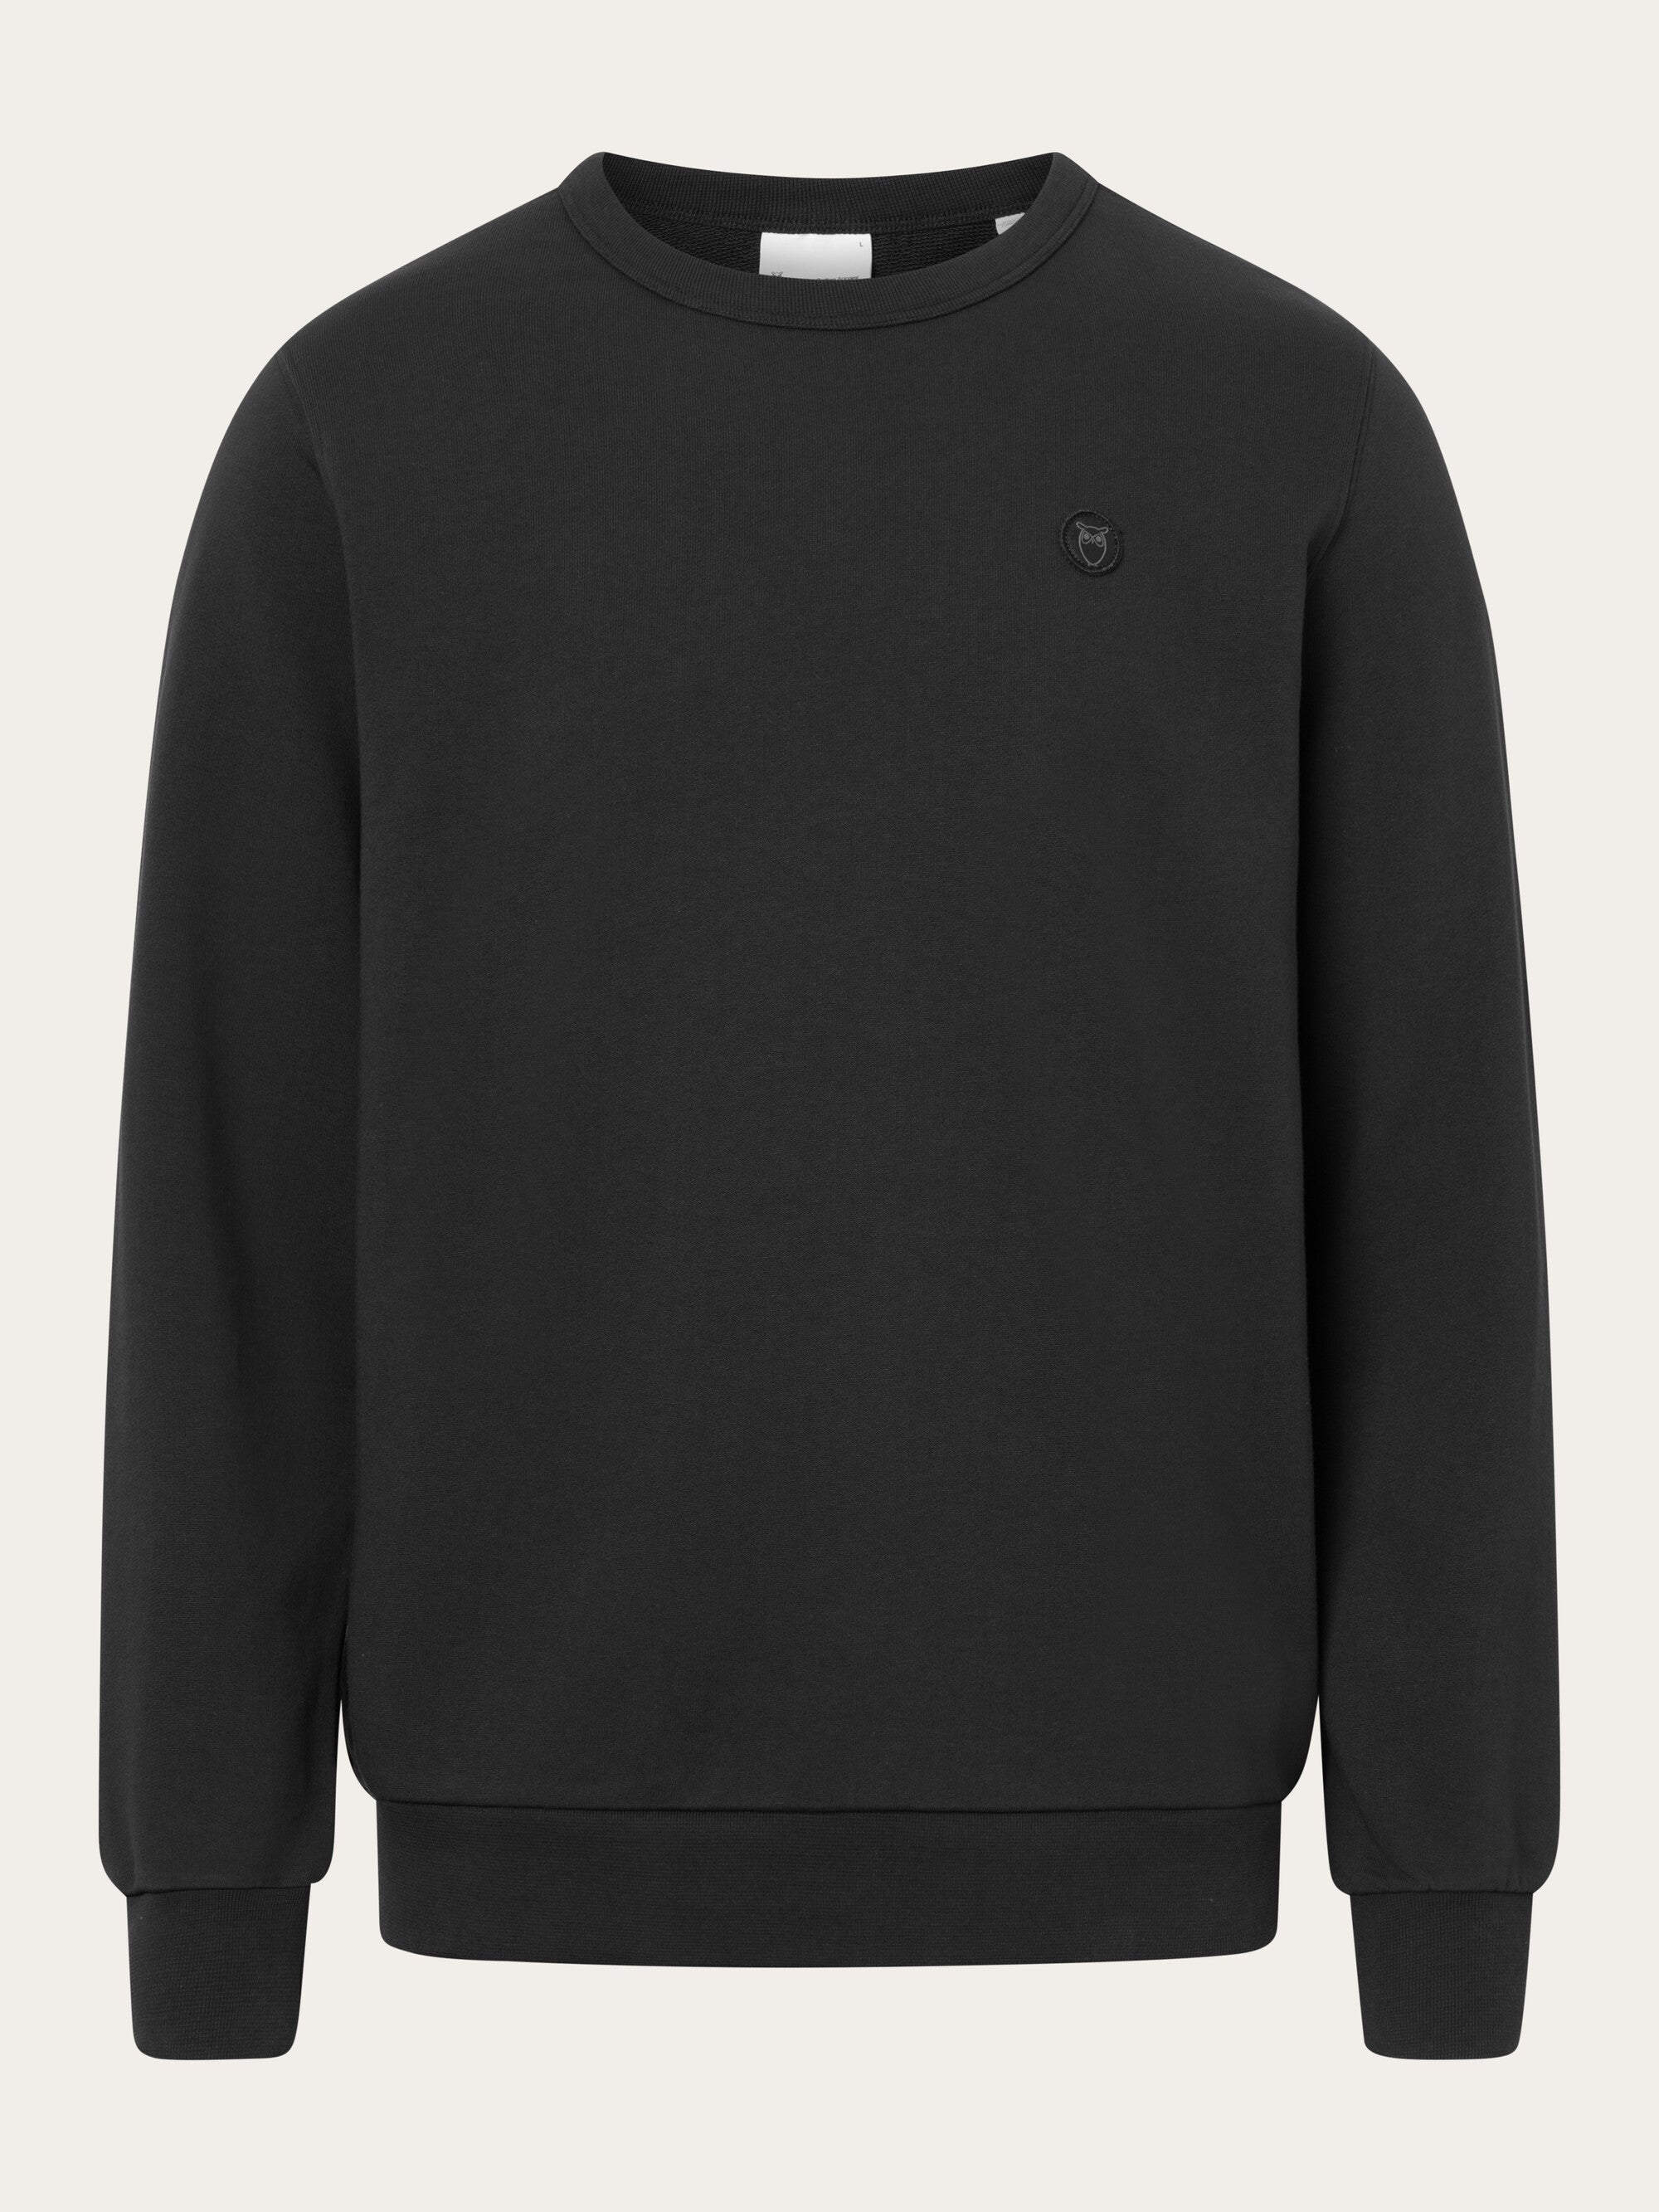 sweat Black Basic - Jet from KnowledgeCotton Apparel® badge Buy -